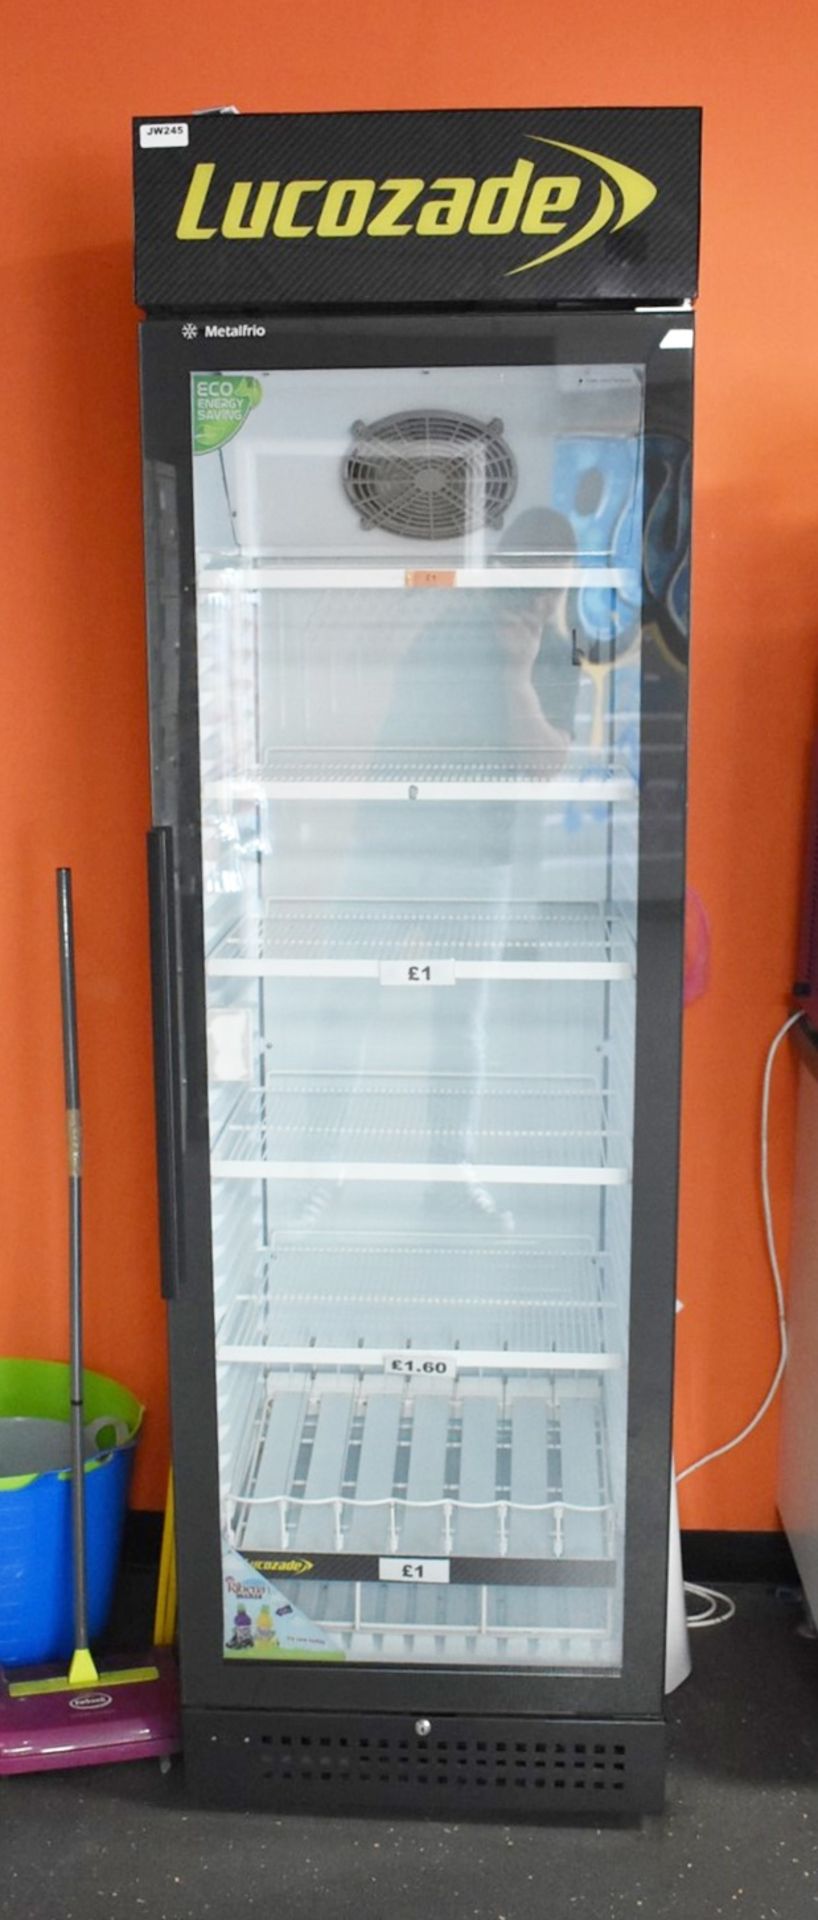 1 x Lucozade Upright Showcase Illuminated Drinks Chiller By Metalfrio - 230v - H200 x W61 x D59 - Image 2 of 10